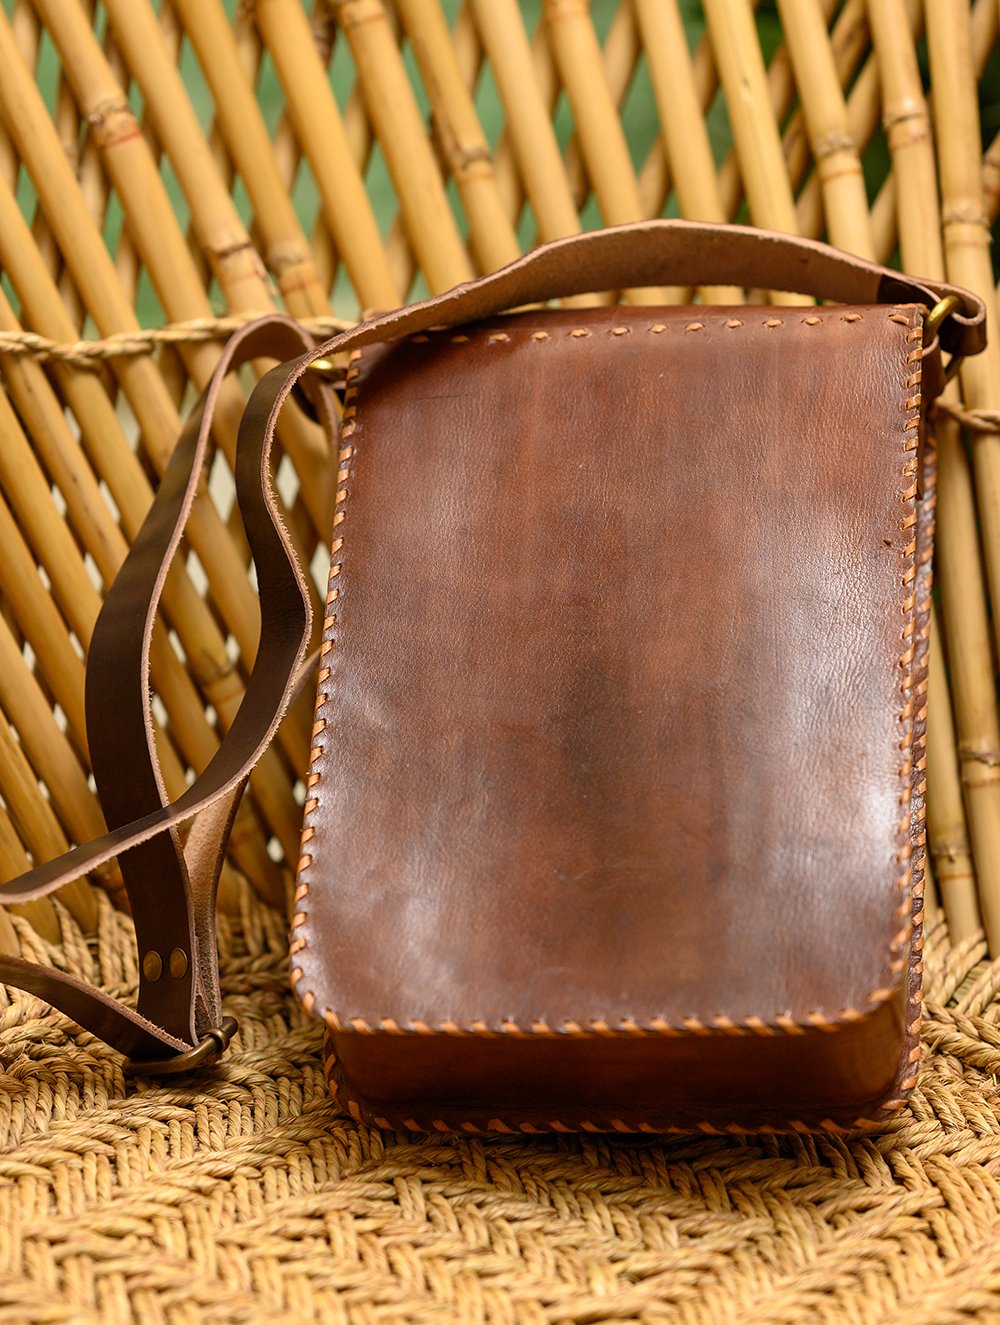 Load image into Gallery viewer, Handcrafted Leather Cross Body Bag With Hand Stitch Detail